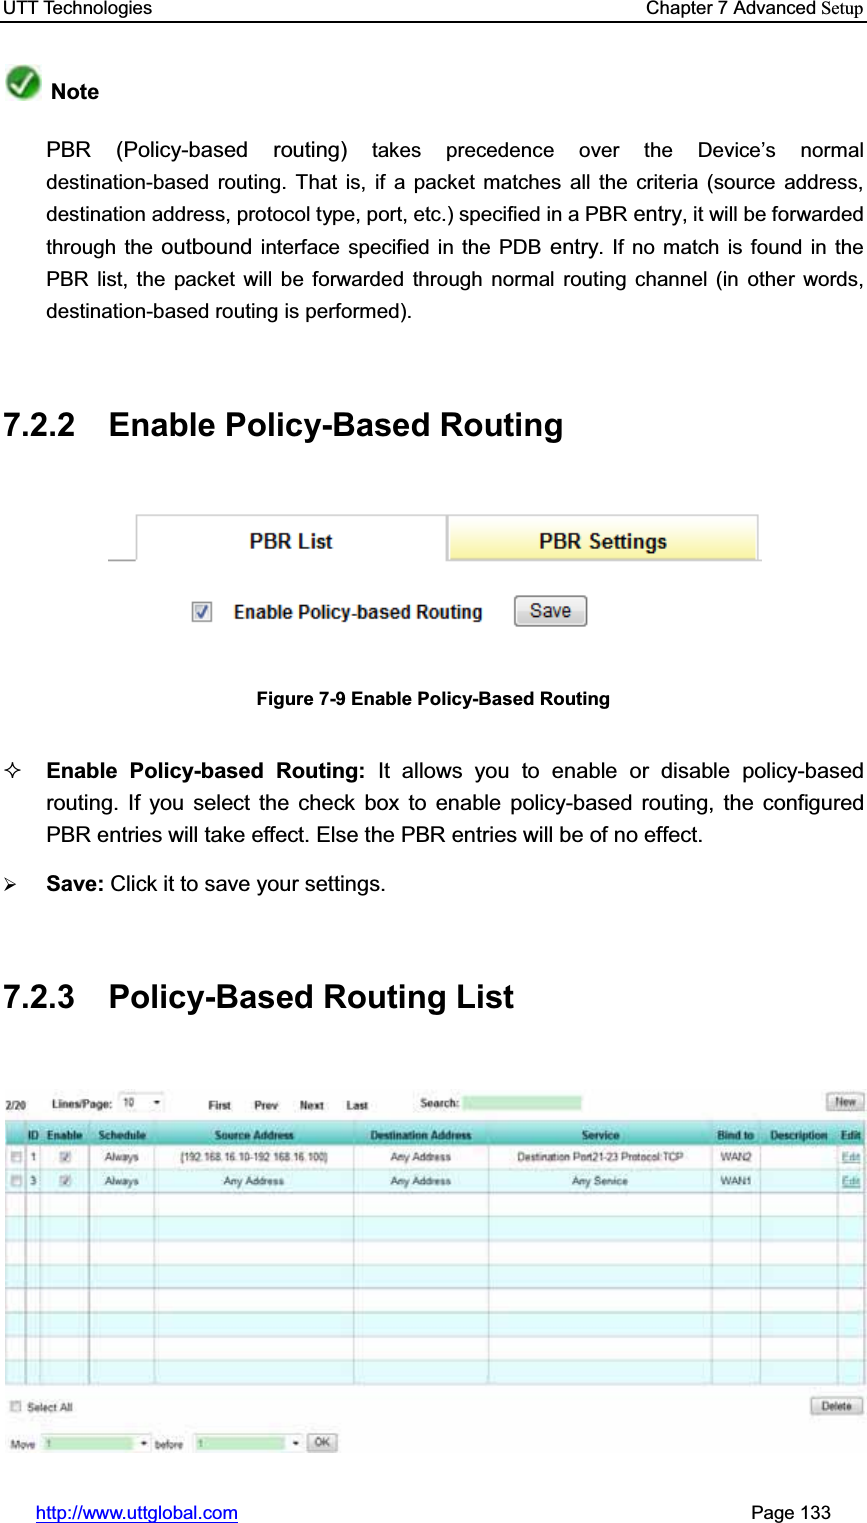 UTT Technologies    Chapter 7 Advanced Setuphttp://www.uttglobal.com                                                       Page 133 NotePBR (Policy-based routing) takes precedence over the Device¶s normal destination-based routing. That is, if a packet matches all the criteria (source address, destination address, protocol type, port, etc.) specified in a PBR entry, it will be forwarded through the outbound interface specified in the PDB entry. If no match is found in the PBR list, the packet will be forwarded through normal routing channel (in other words, destination-based routing is performed). 7.2.2 Enable Policy-Based Routing Figure 7-9 Enable Policy-Based Routing Enable Policy-based Routing: It allows you to enable or disable policy-based routing. If you select the check box to enable policy-based routing, the configured PBR entries will take effect. Else the PBR entries will be of no effect. ¾Save: Click it to save your settings.7.2.3 Policy-Based Routing List 